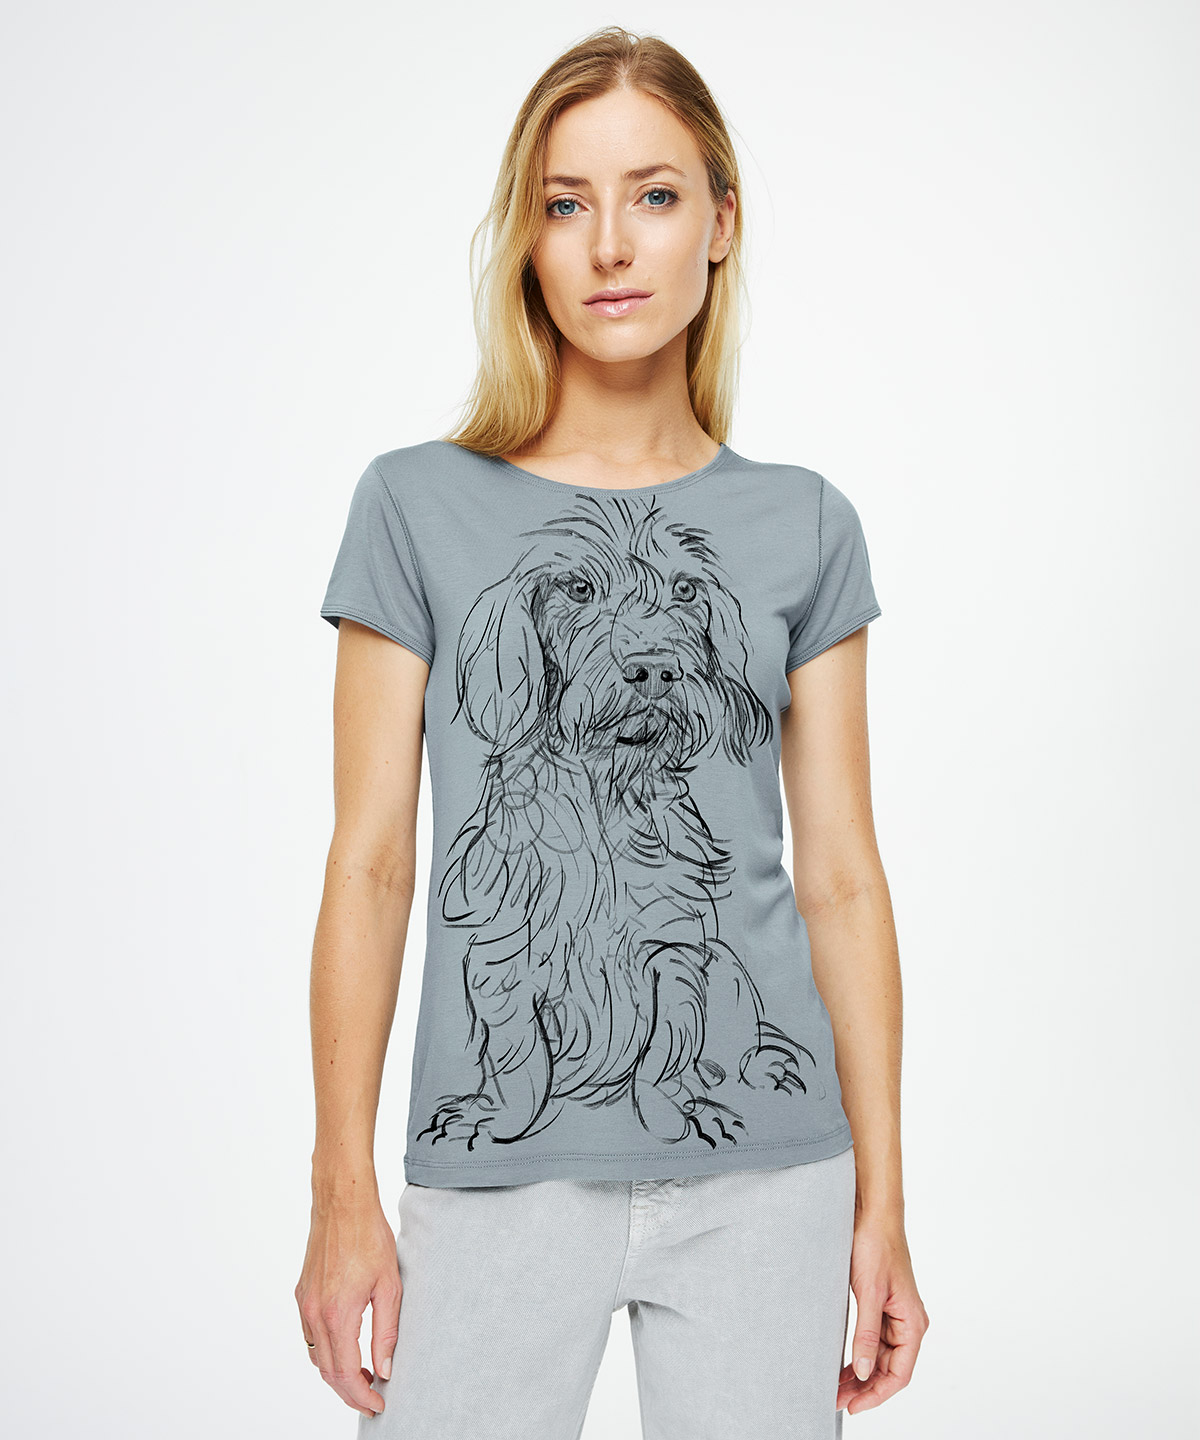 Wirehaired Dachshund storm cloud t-shirt woman